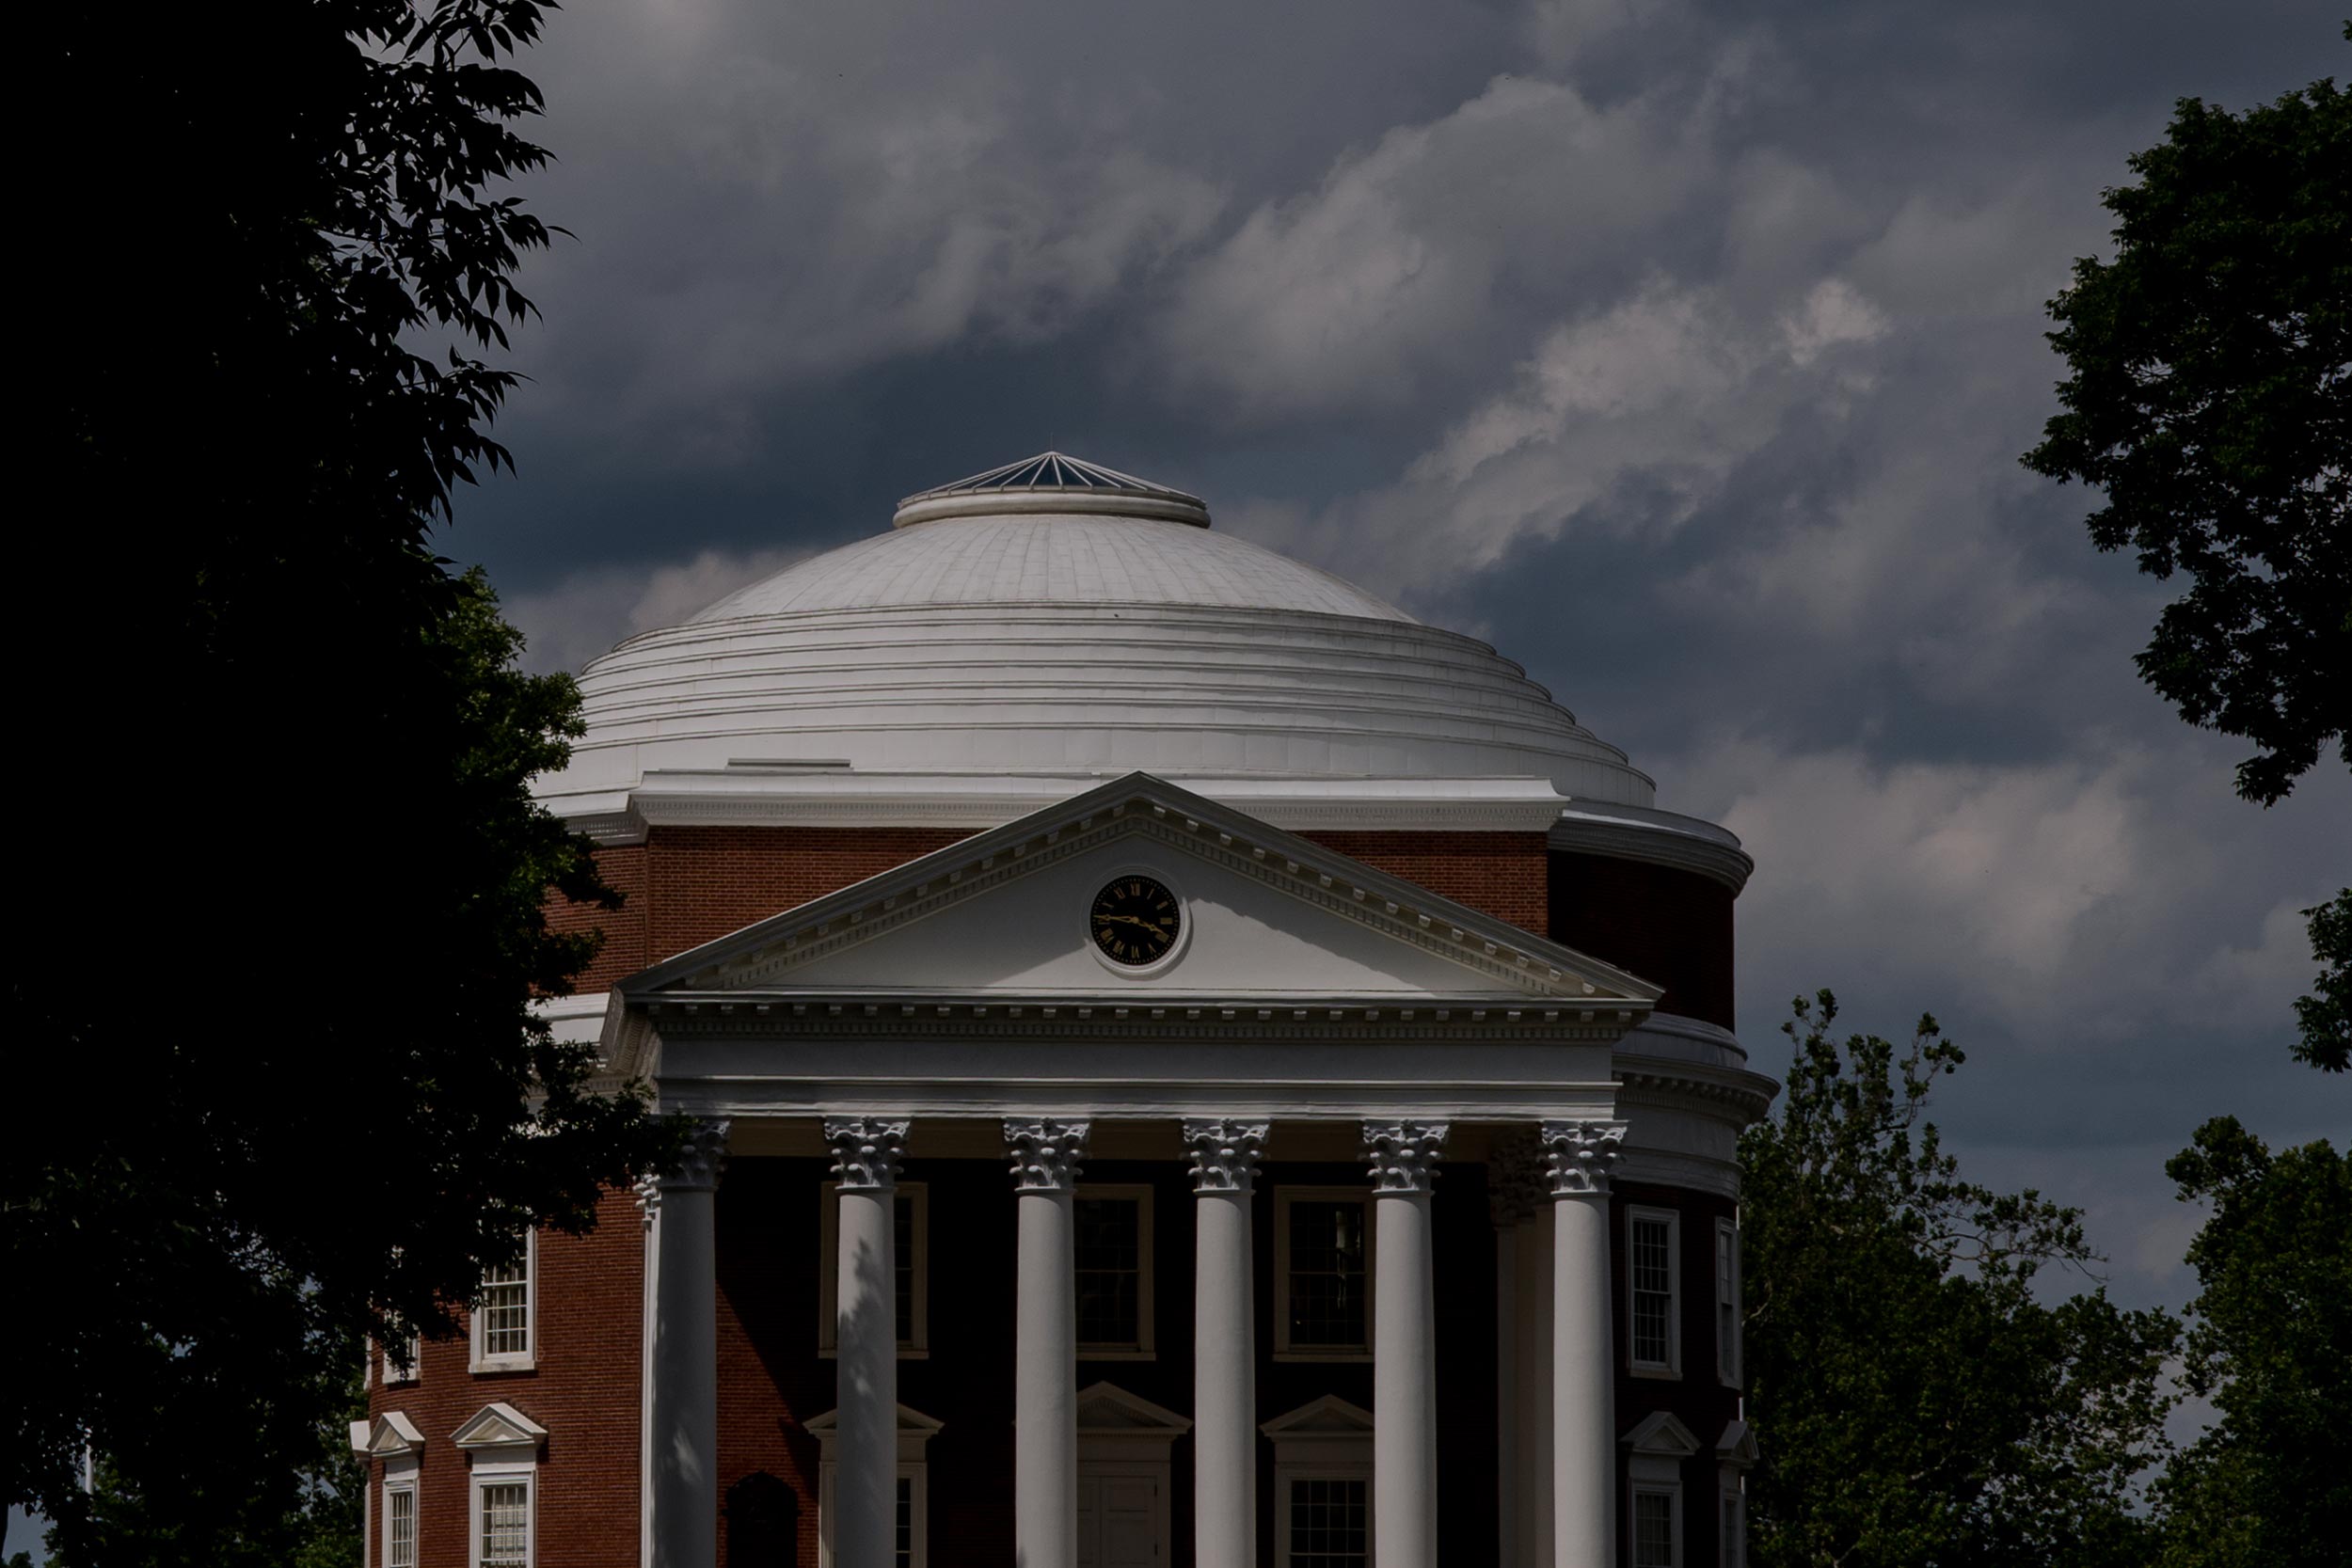 The Rotunda with storm clouds behind it